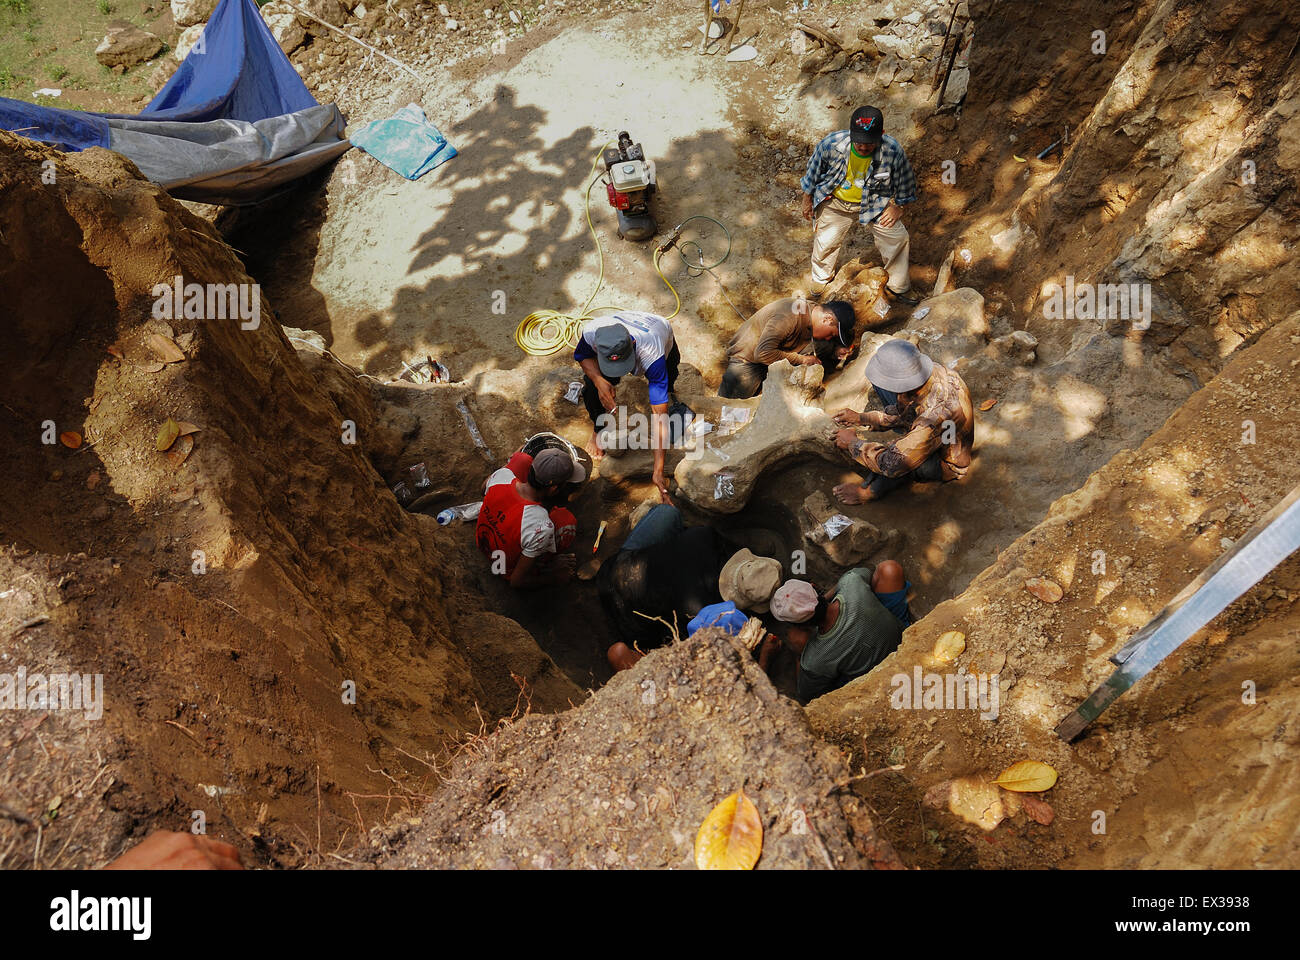 Paleontologists and villagers are working on the excavation of fossilized bones of Elephas hysudrindicus in Blora, Central Java, Indonesia. Stock Photo